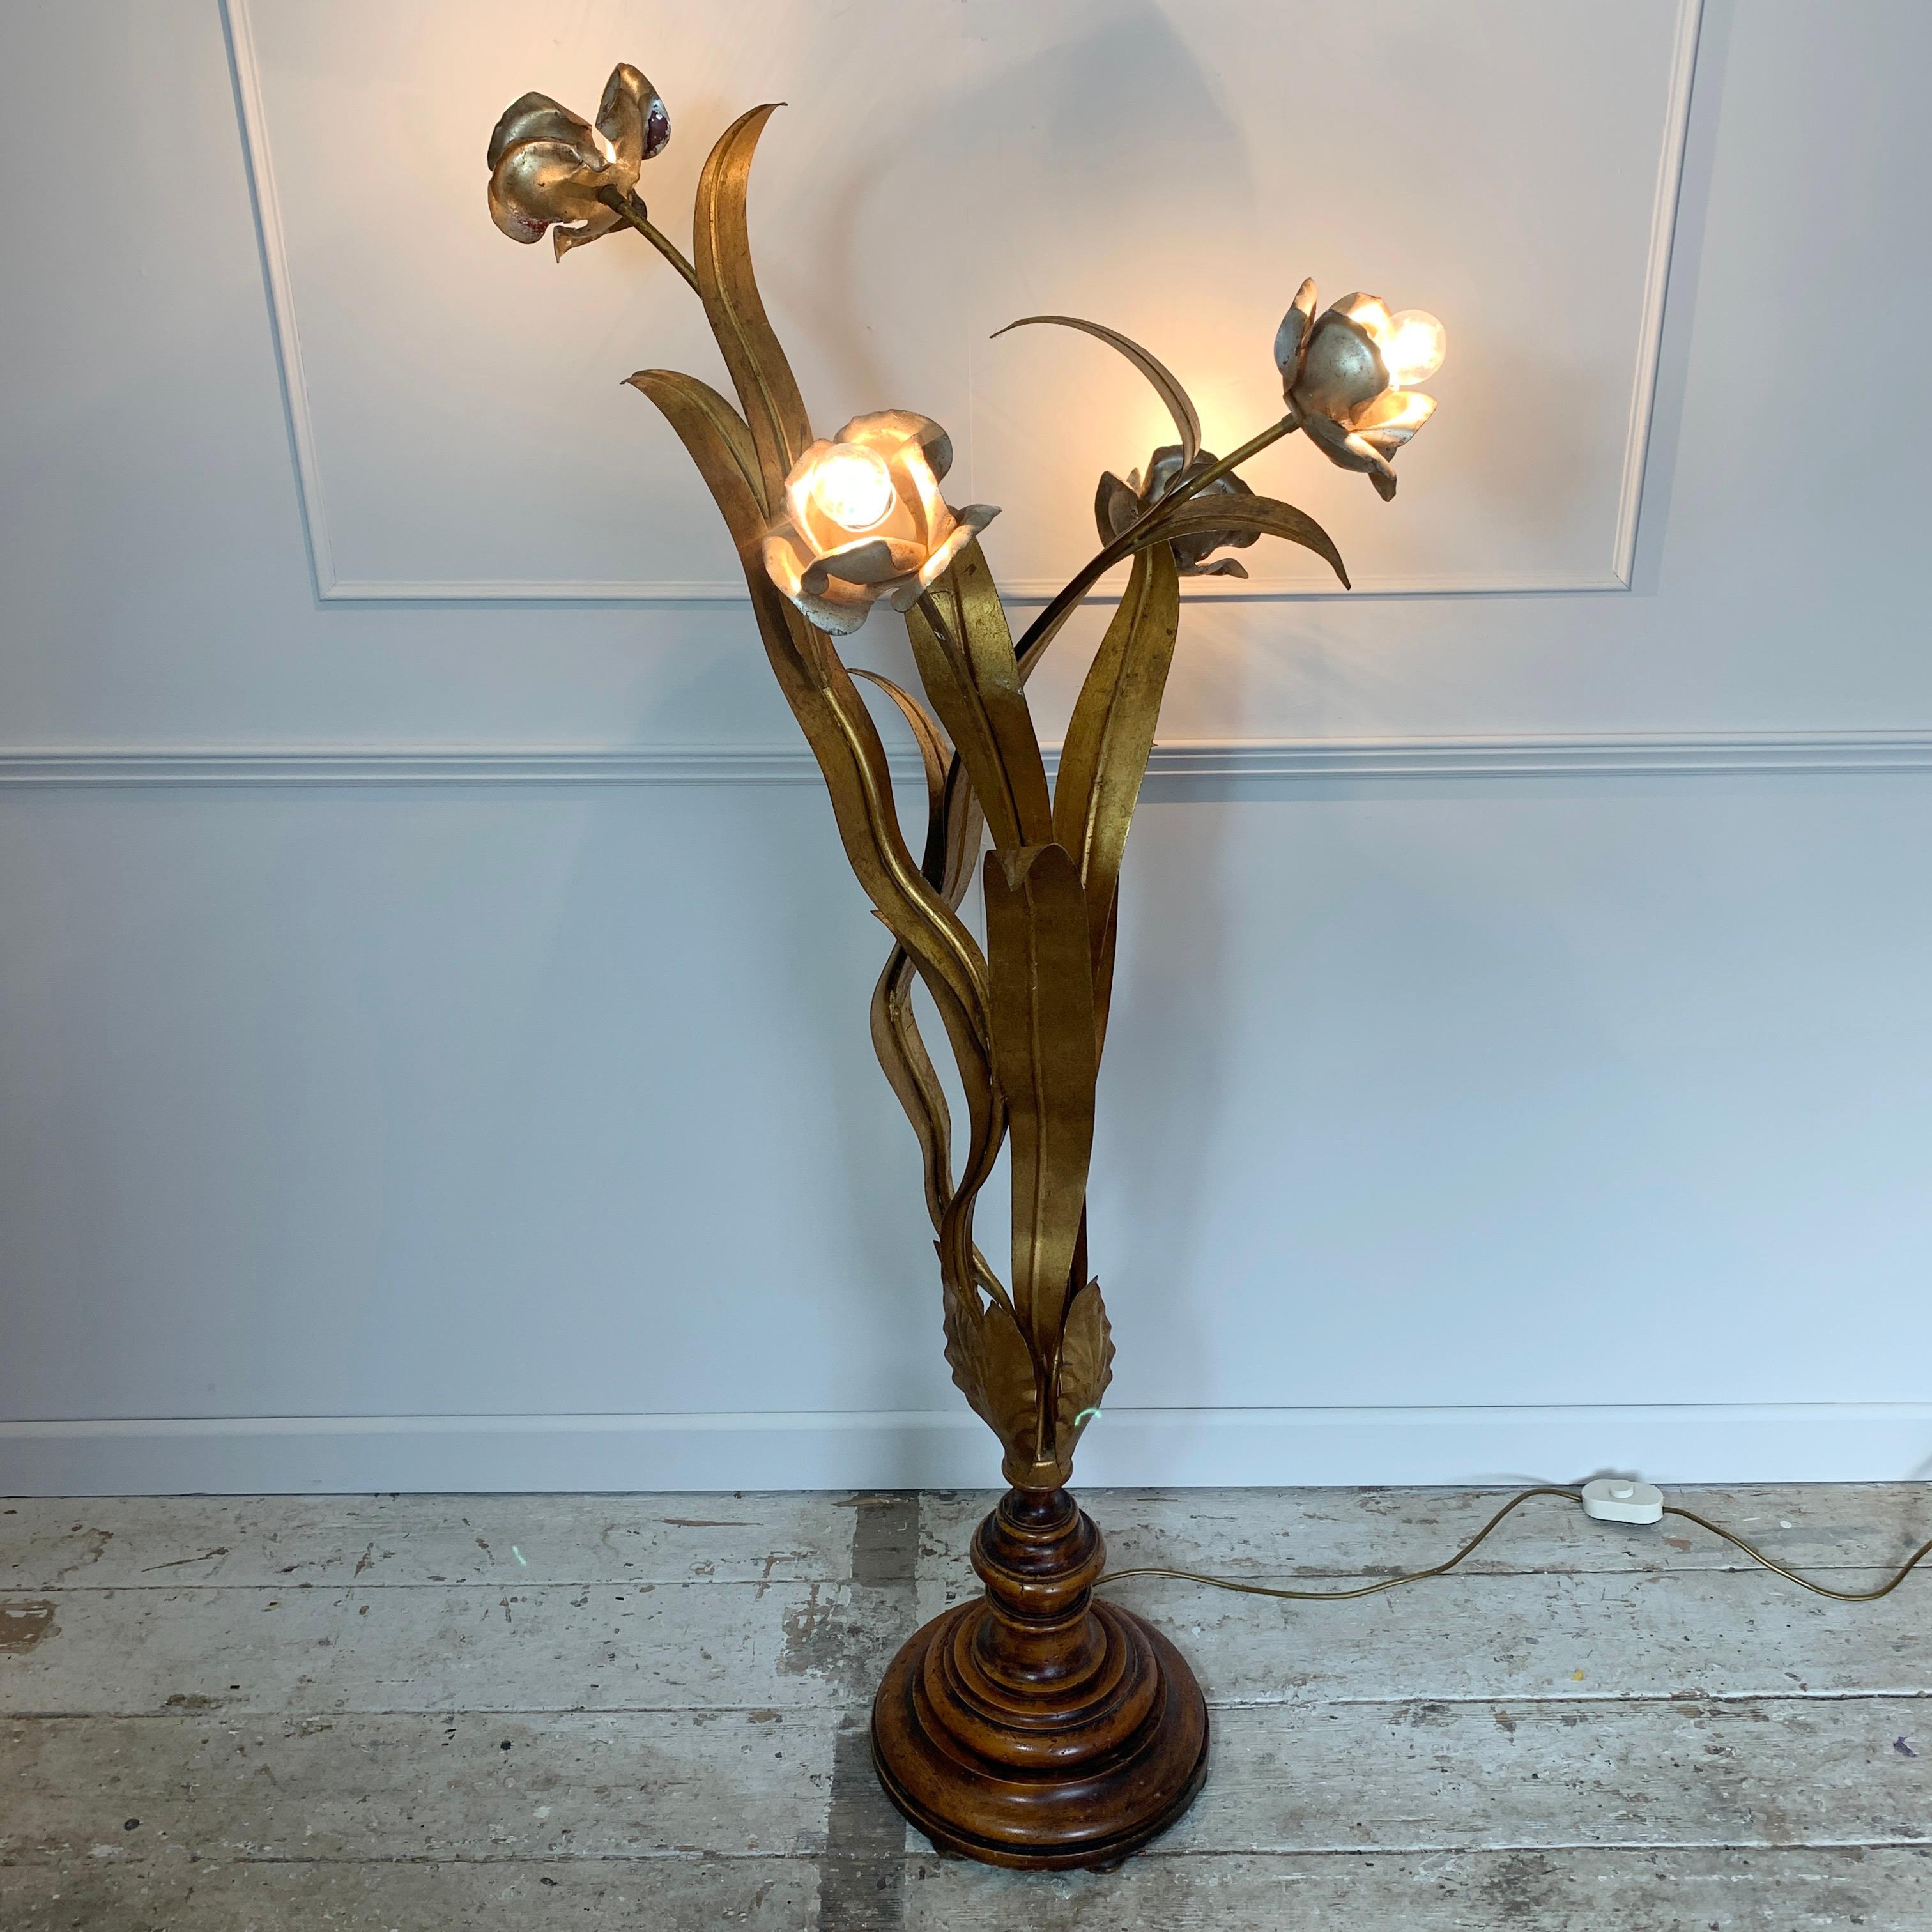 Mid-Century Modern French Gold and Silver Flower Floor Lamp with Turned Wooden Base, circa 1960s For Sale